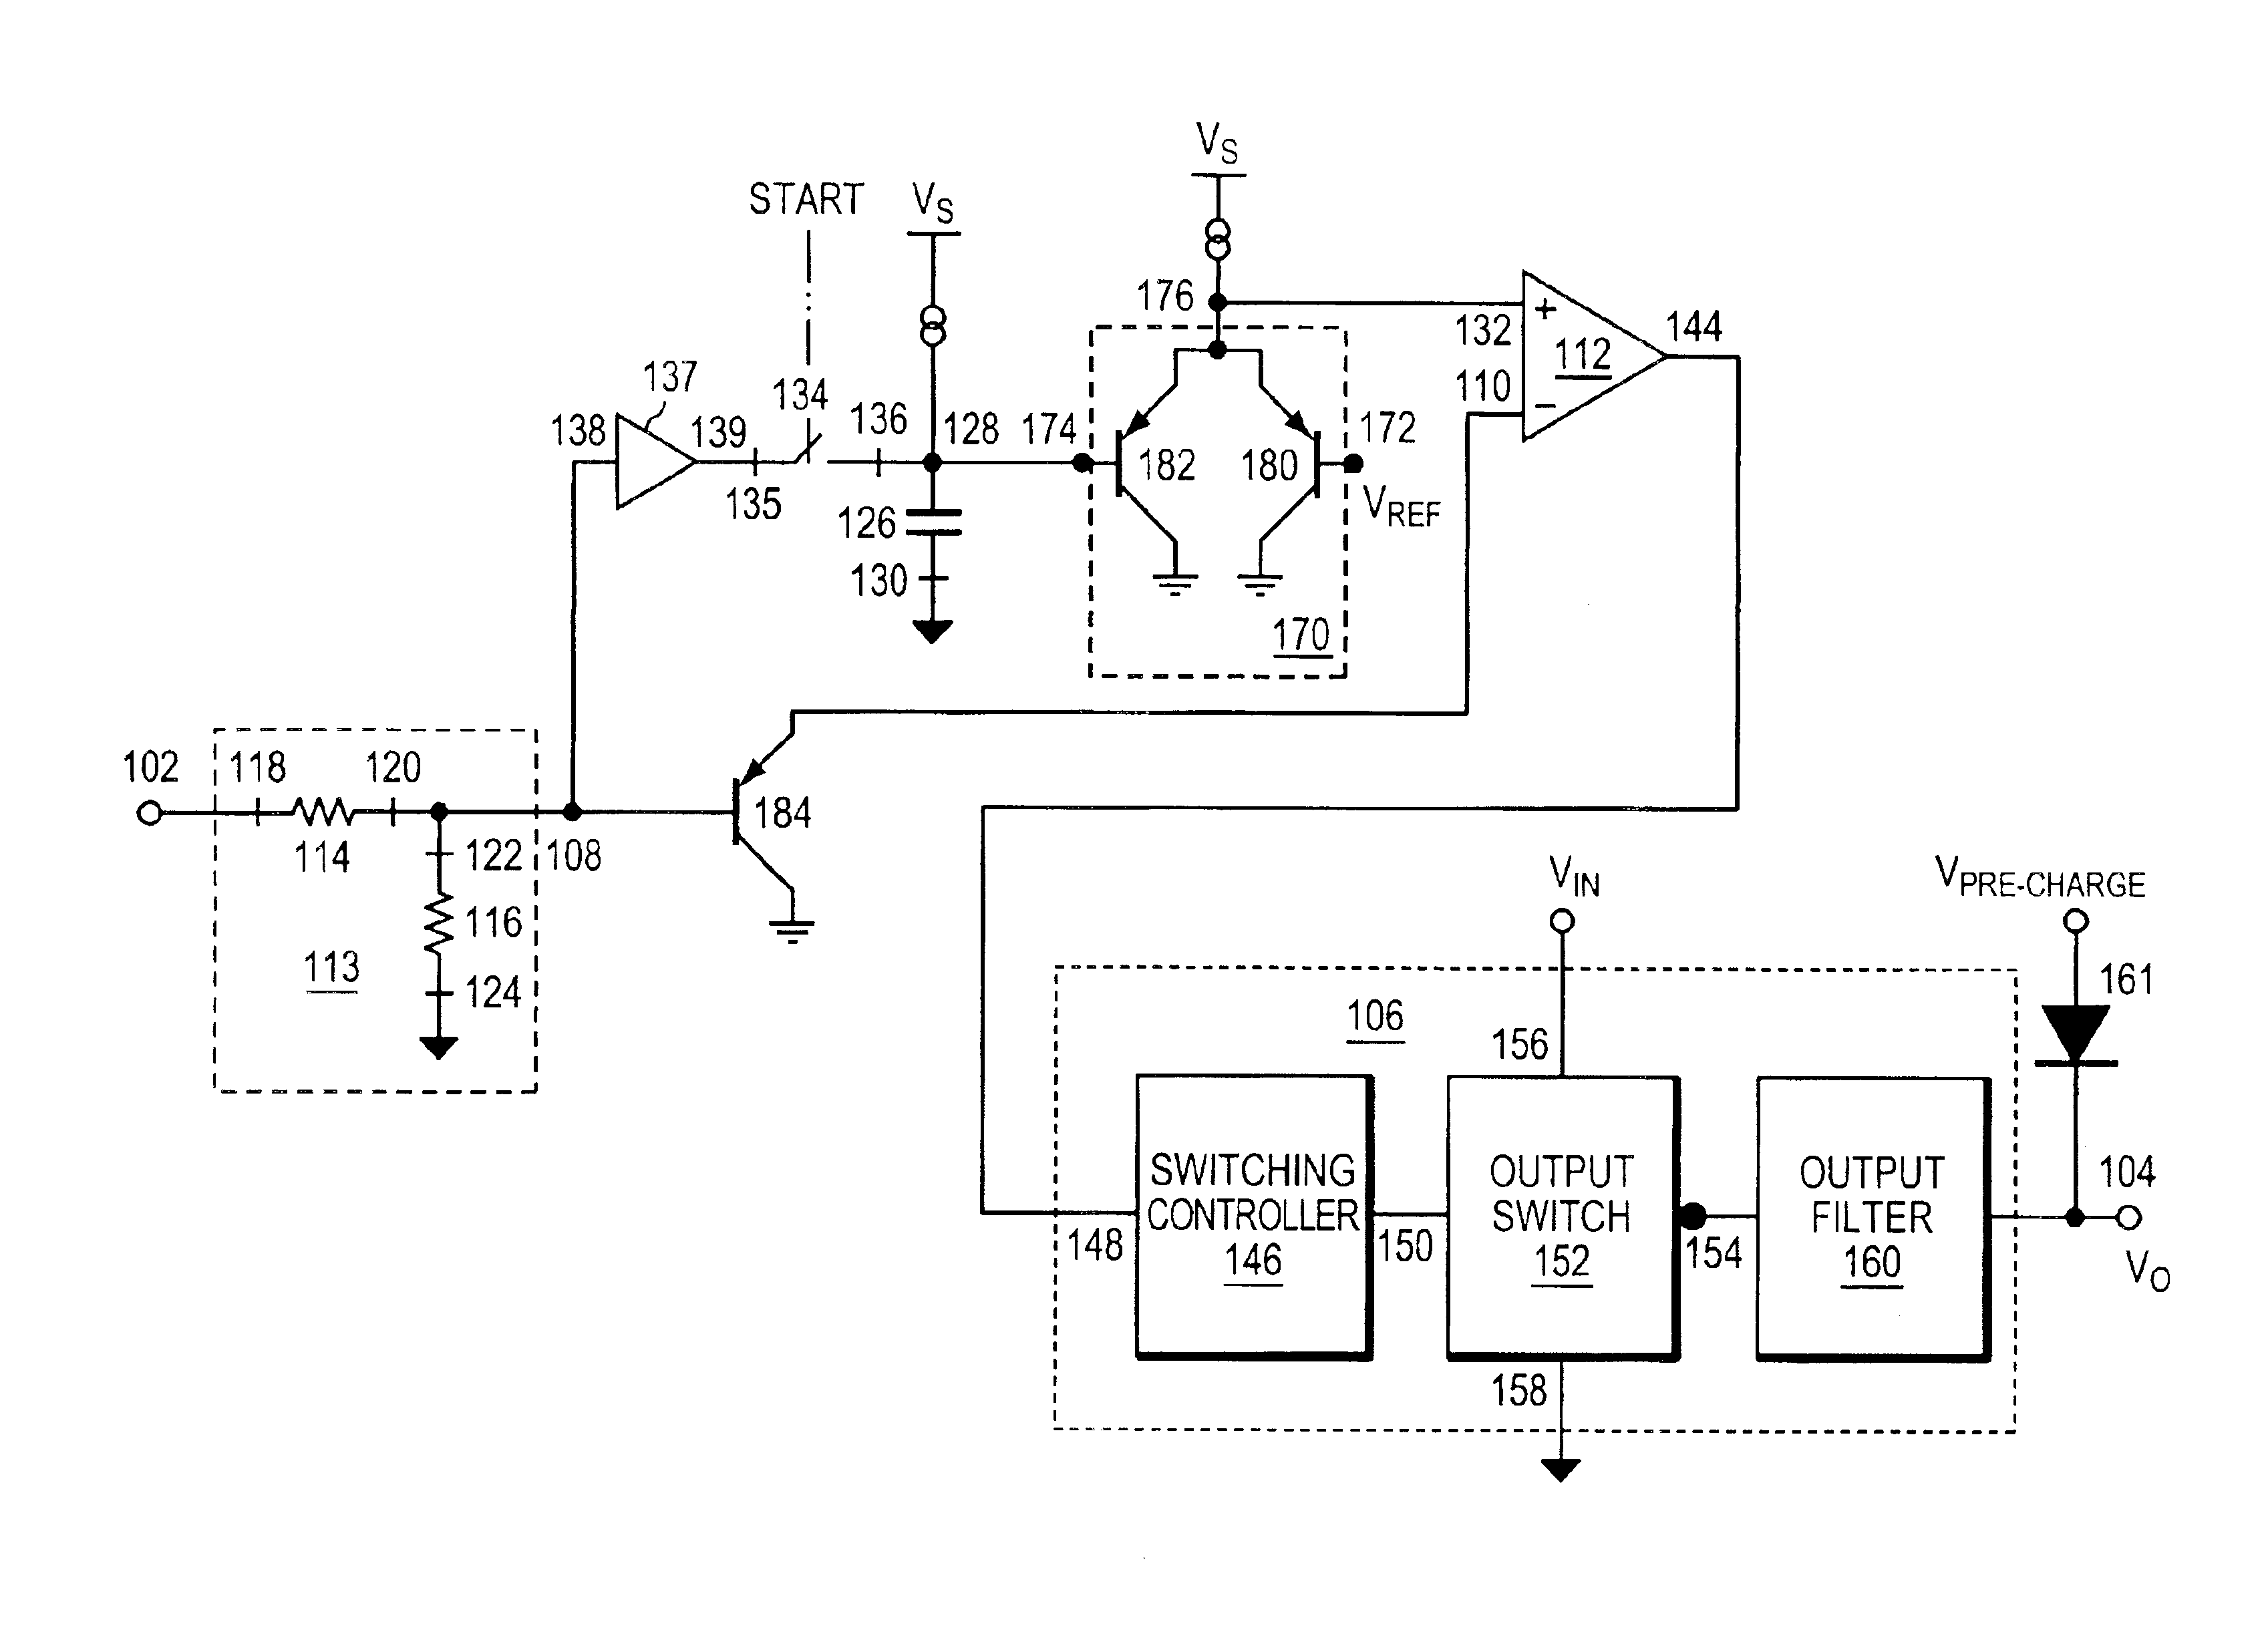 Apparatus for and method of adjusting a switching regulator output for a circuit having a pre-charge voltage